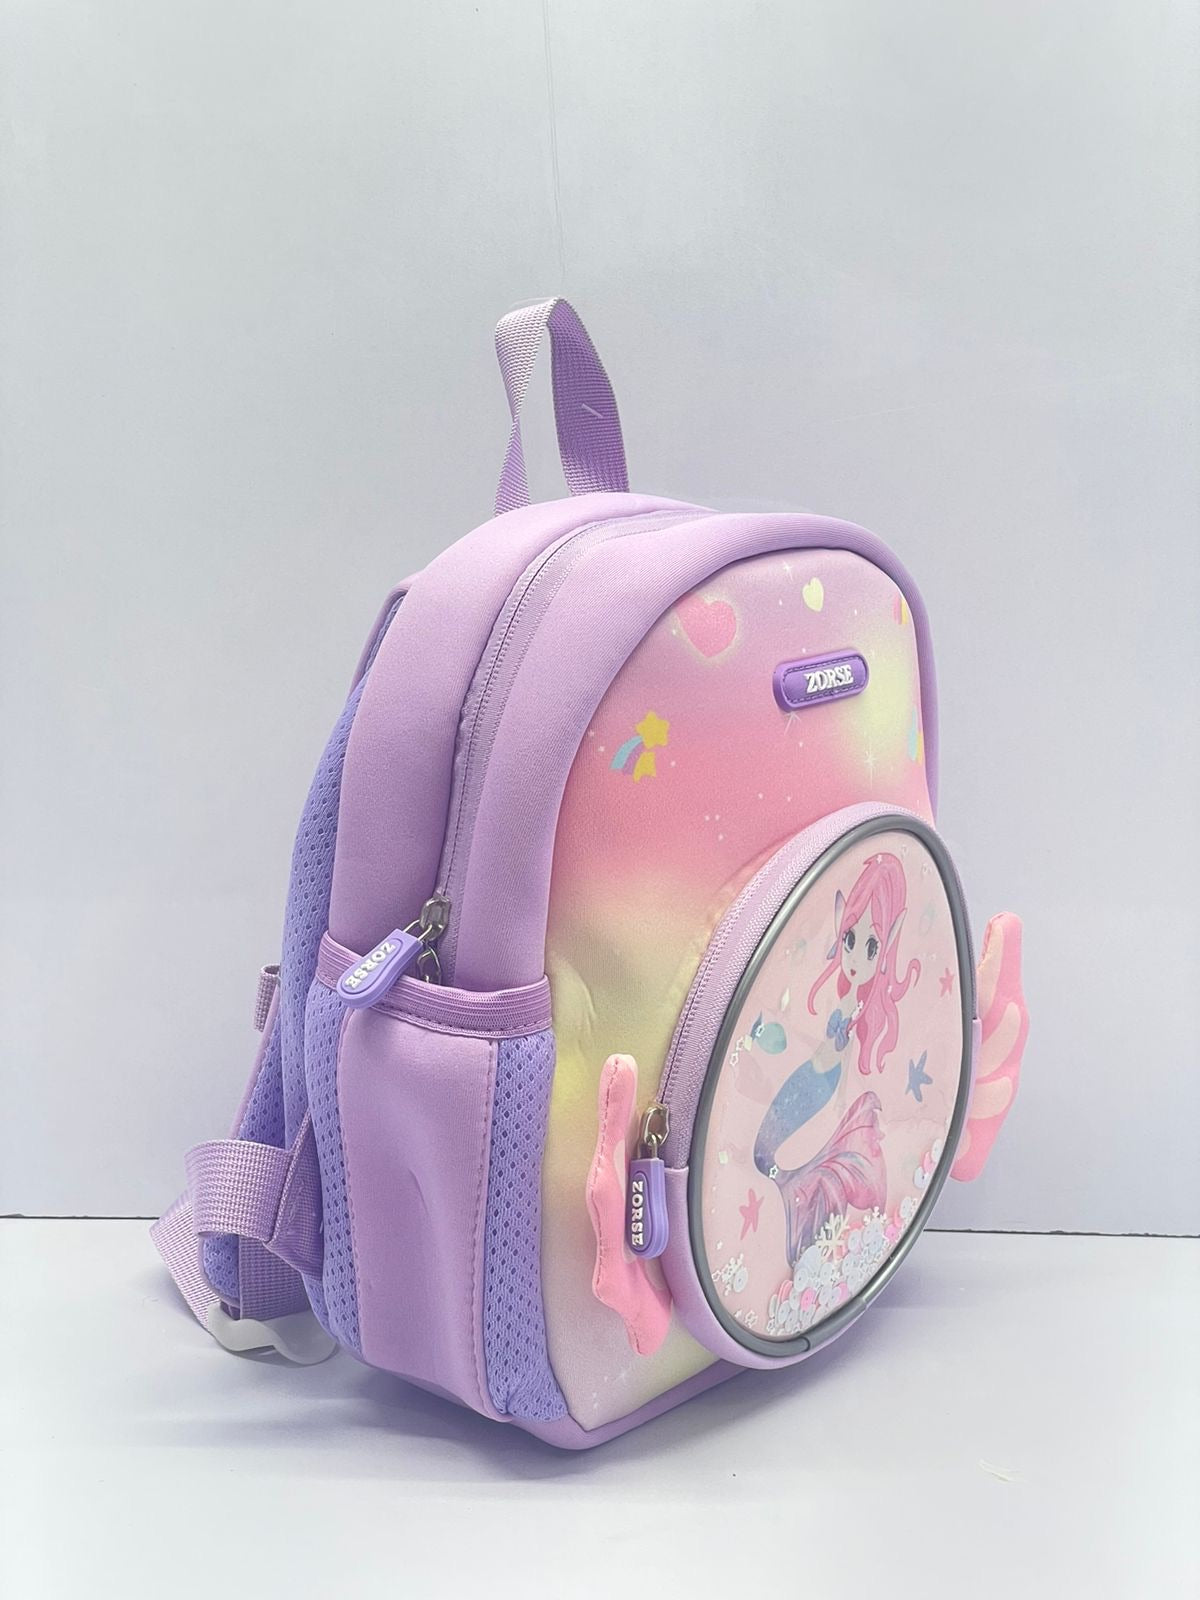 ZORSE 3D mermaid school backpack! (Small size)